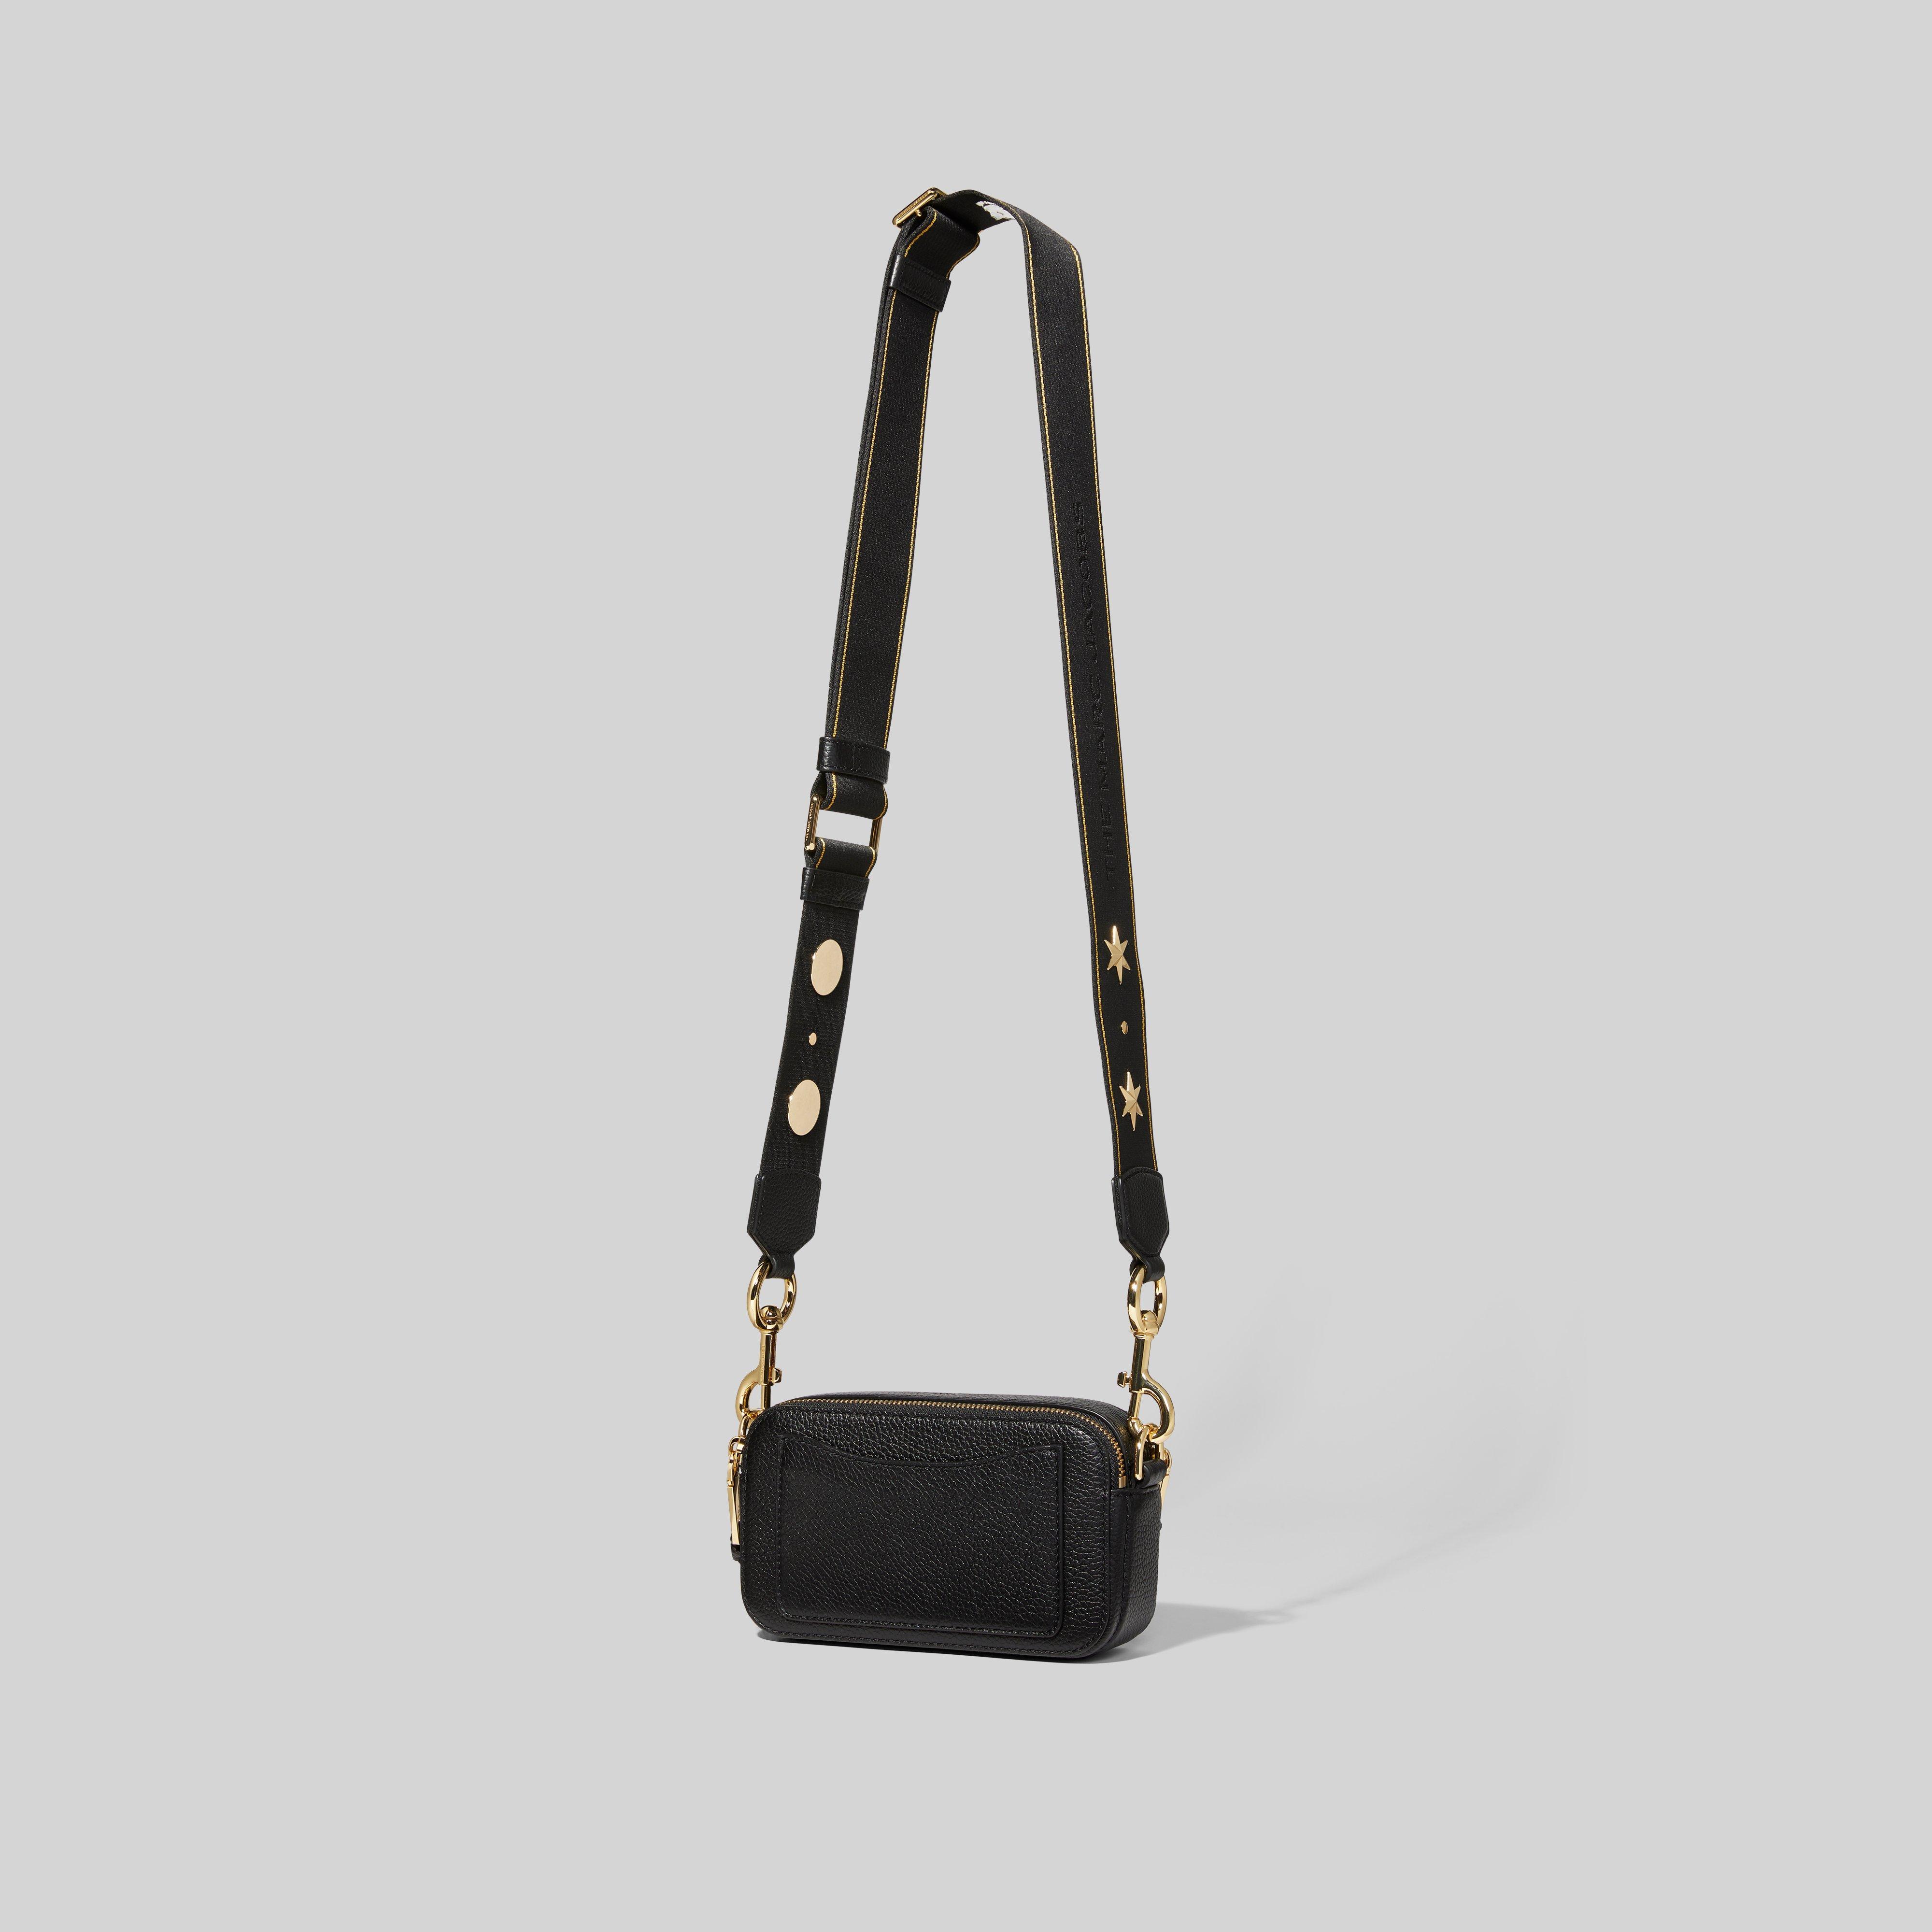 Marc Jacobs The Snapshot Gilded Crossbody Bag – Cettire